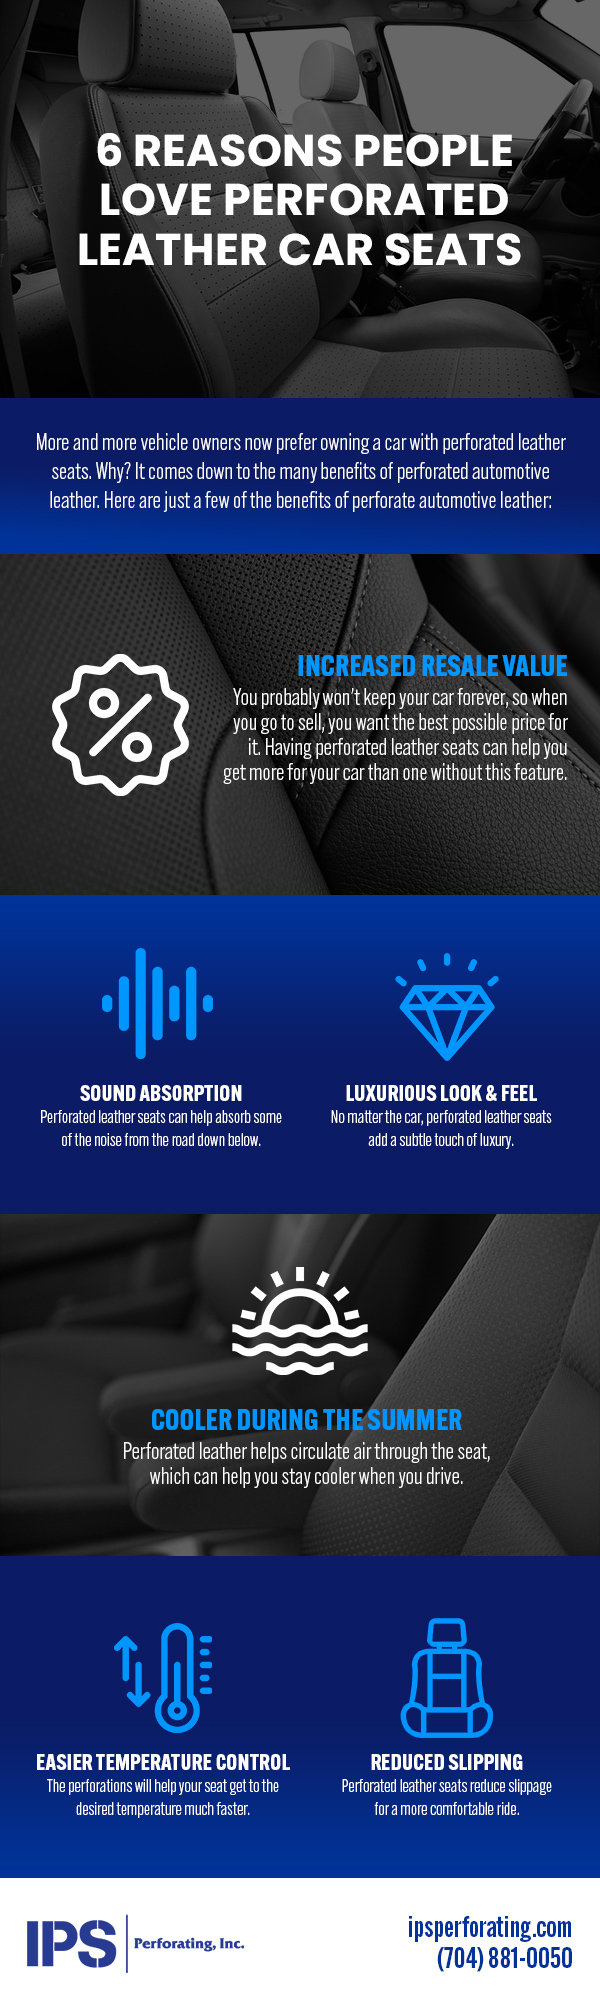 Learn More About Perforated Automotive Seats